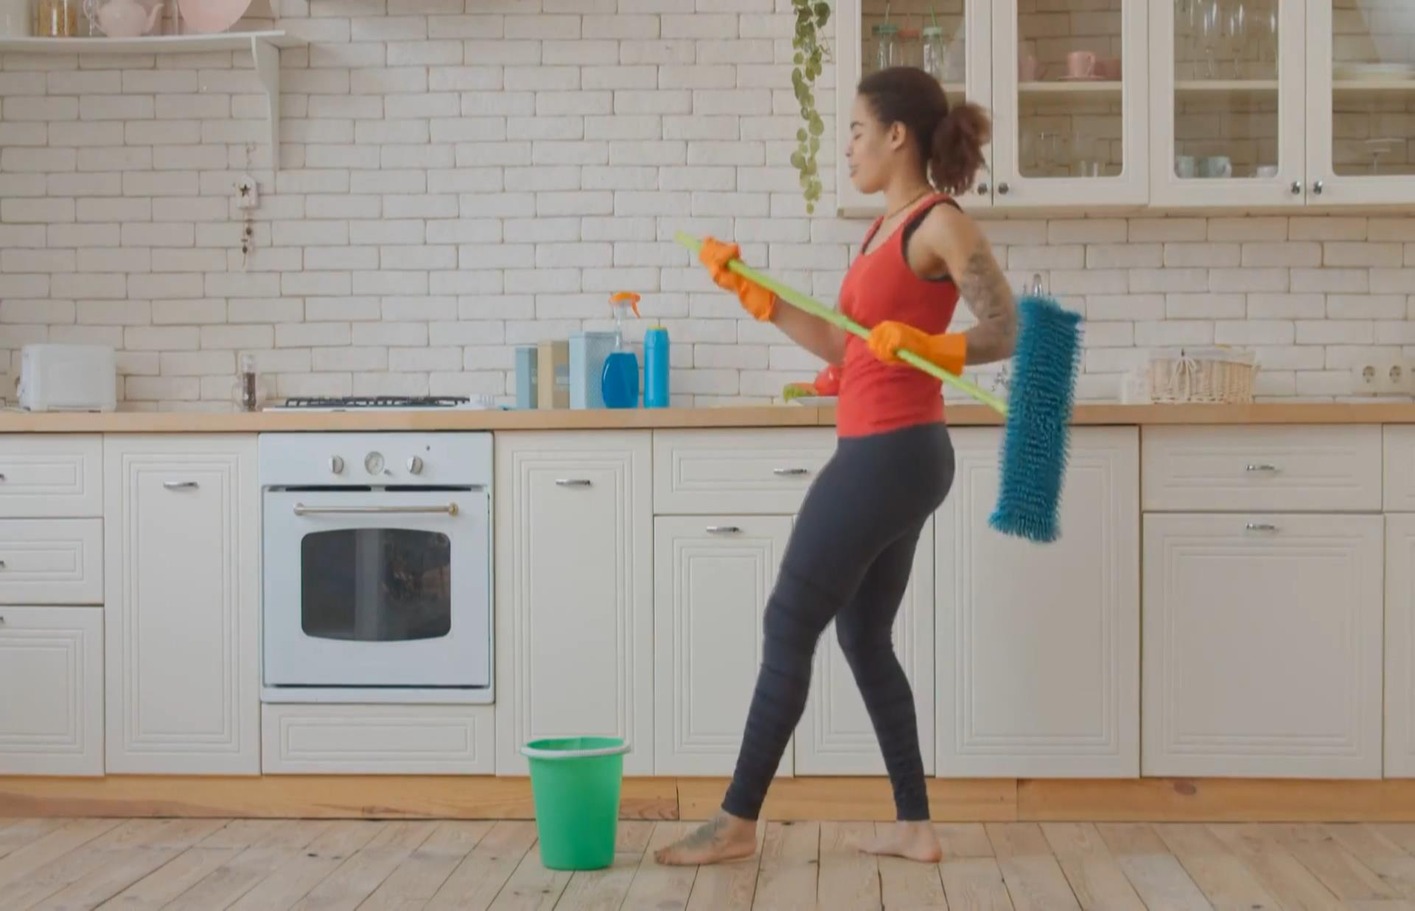 Cleaning lady dance ad